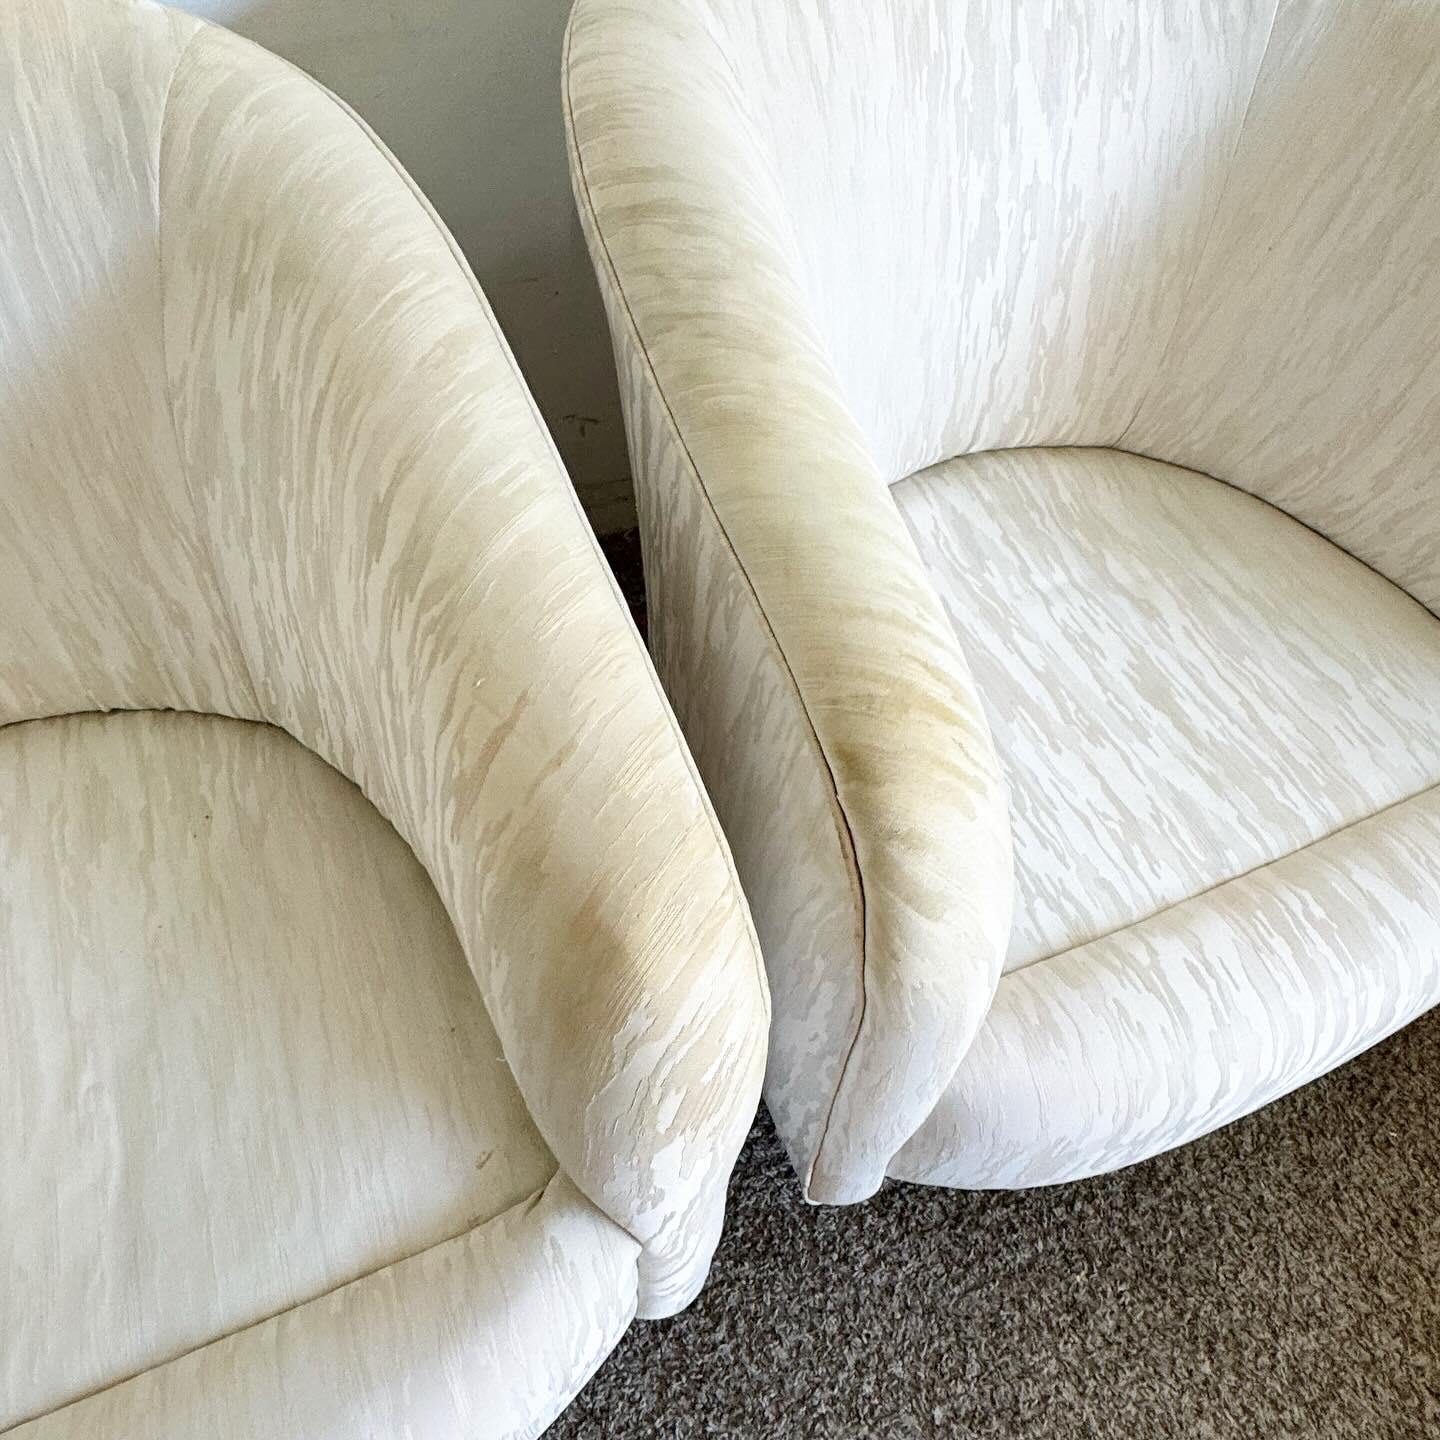 Postmodern Tufted Barrel Swivel Chairs - a Pair For Sale 3